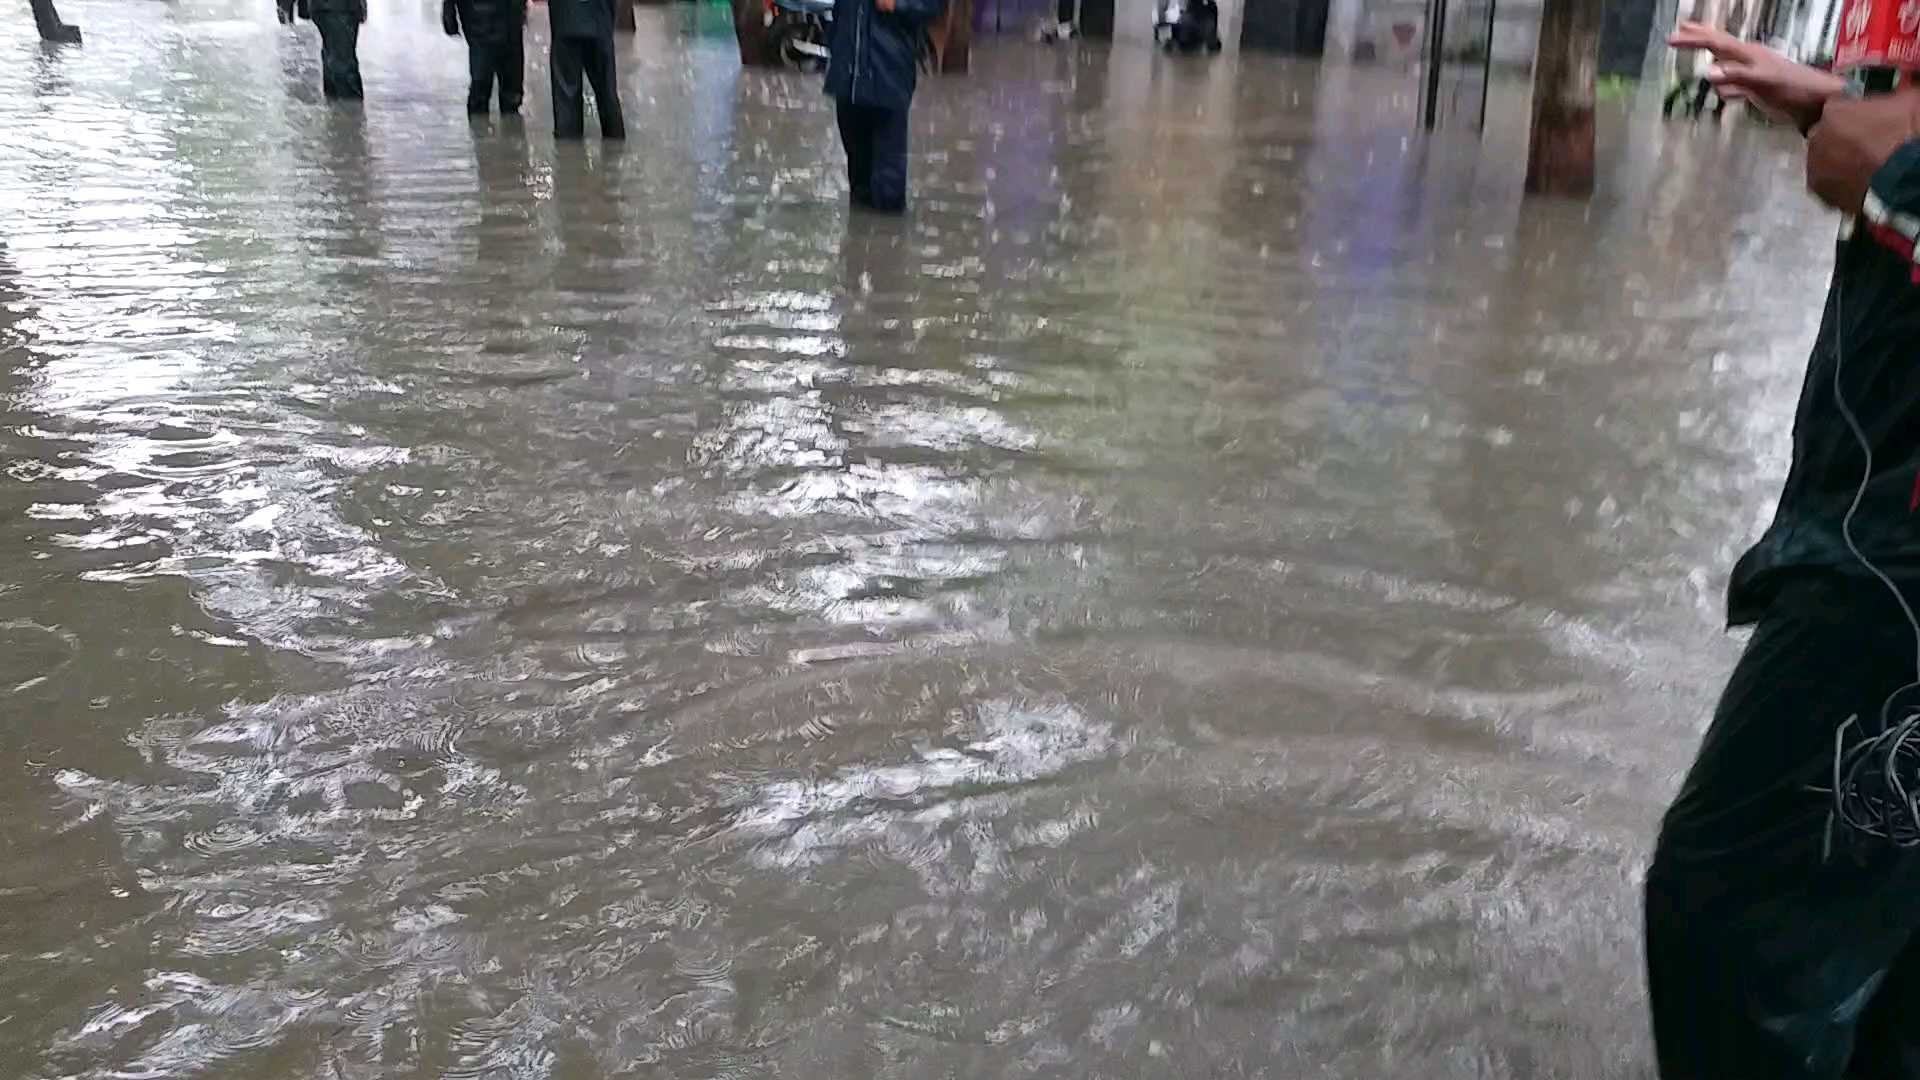 Streets filled with water